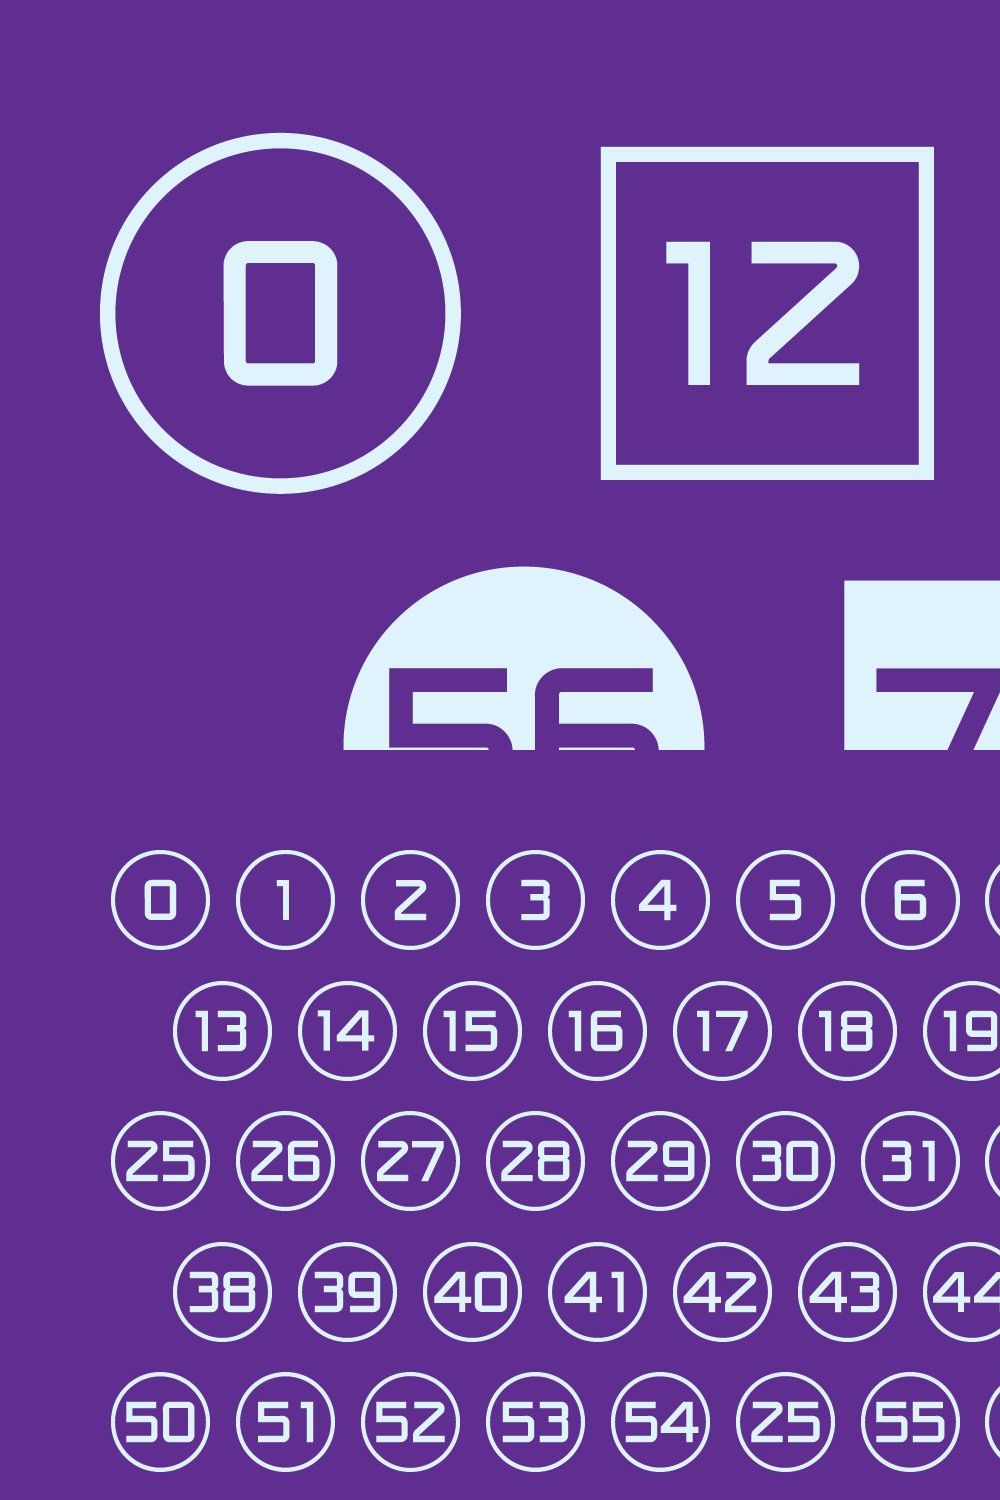 An example of a font with white numbers in circles on a purple background.